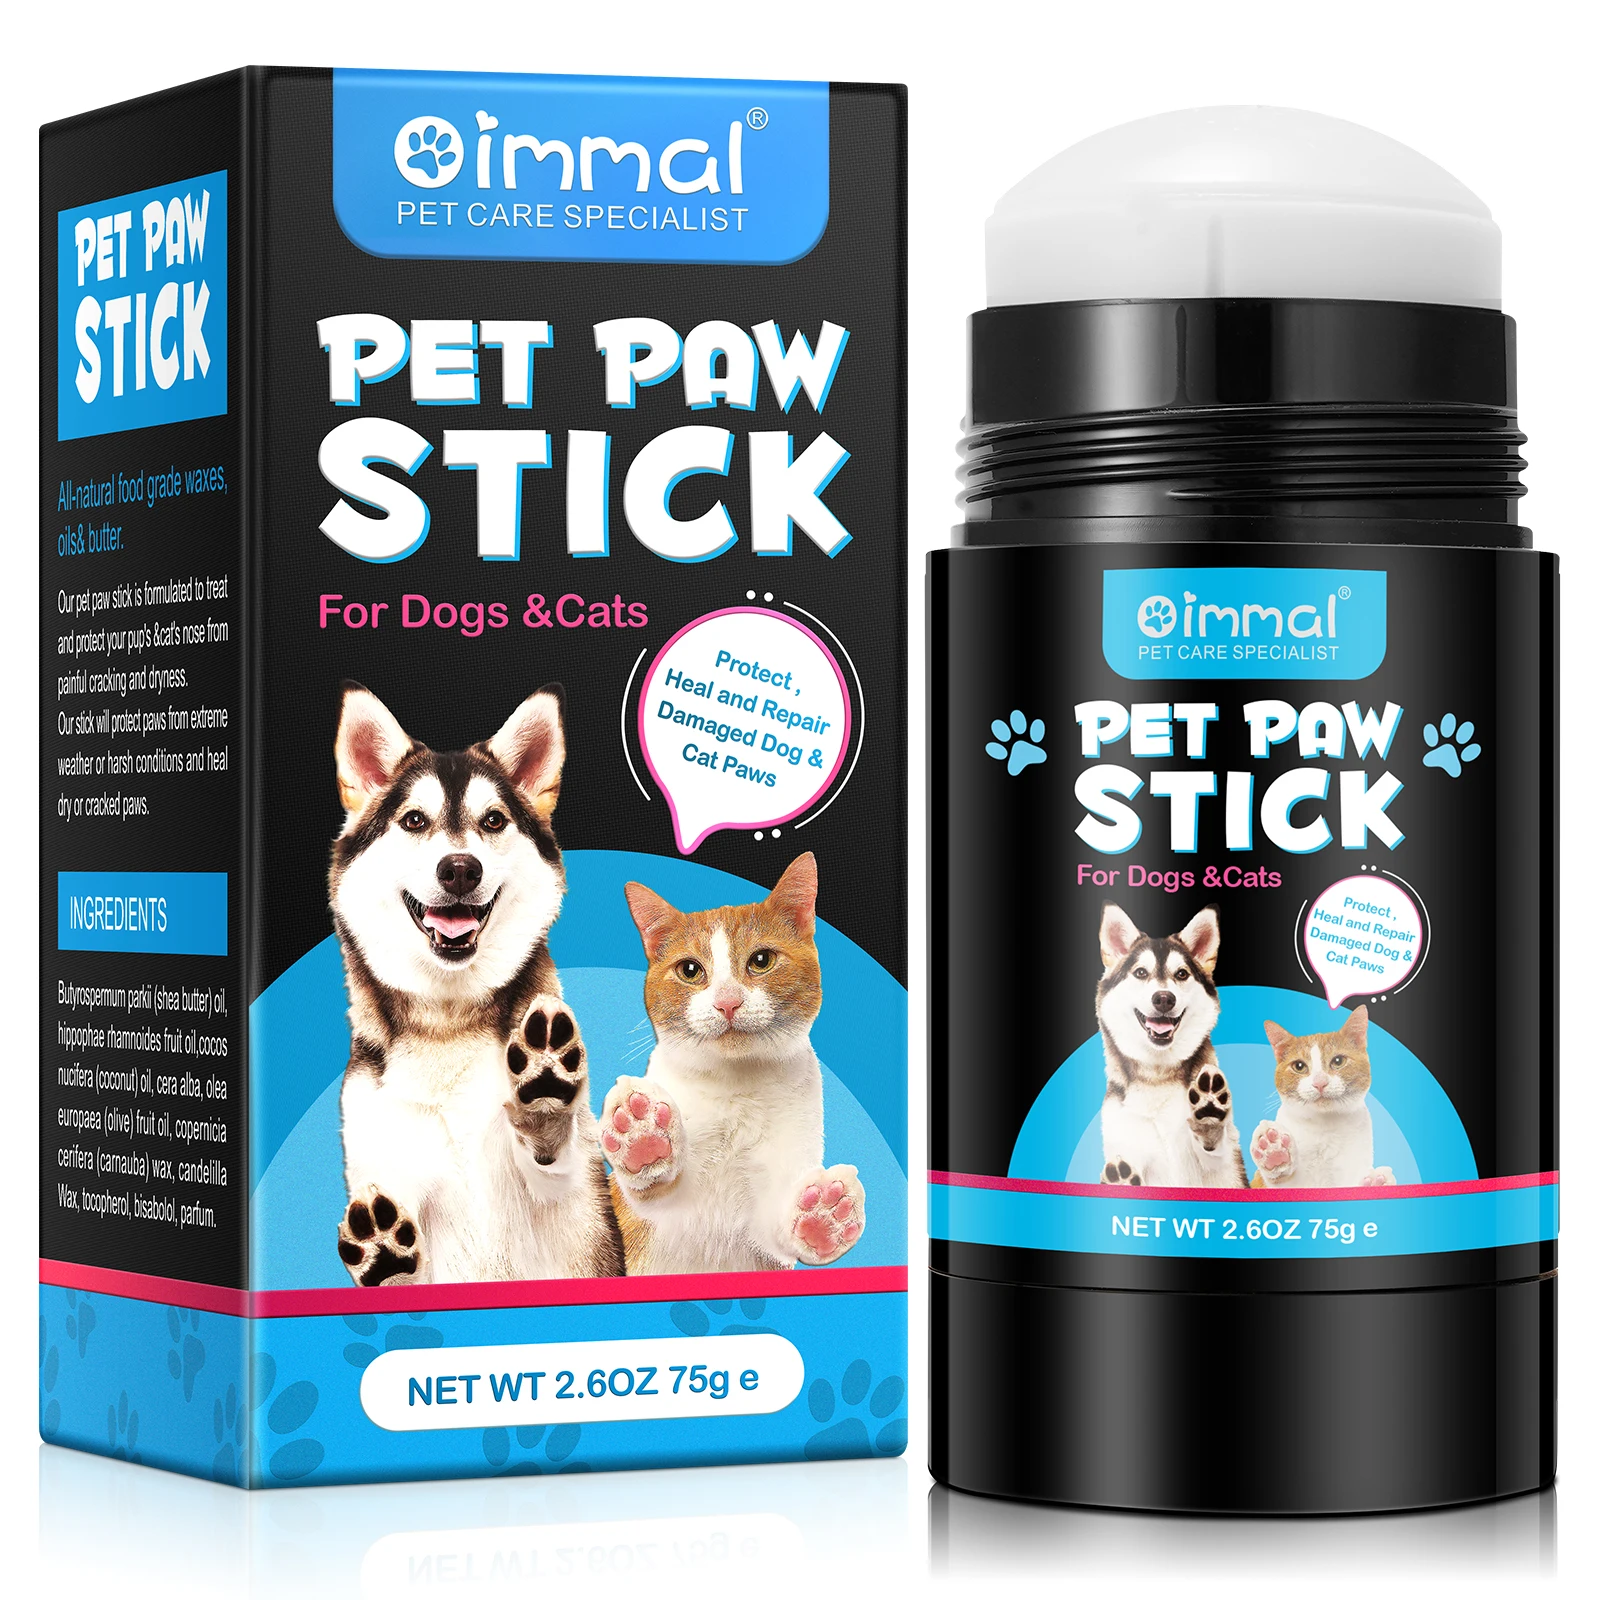 

OEM Private Label Pet Claw Balm Stick Dogs Paw Protection Cream Protect Heal And Repair Damaged Paws For Dogs And Cats